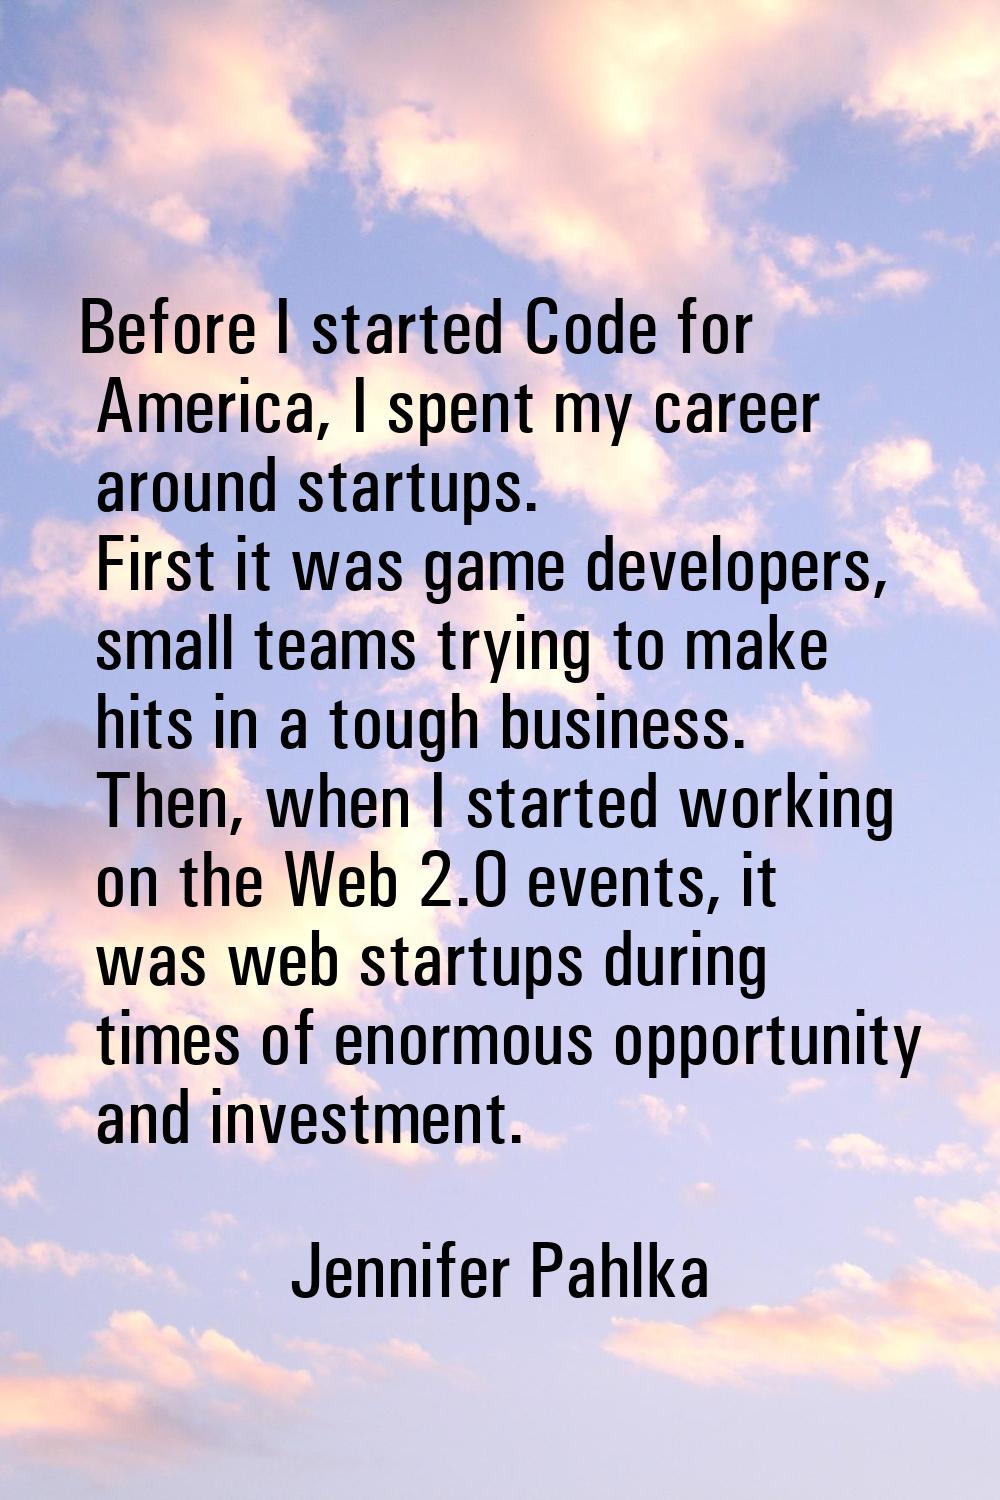 Before I started Code for America, I spent my career around startups. First it was game developers,